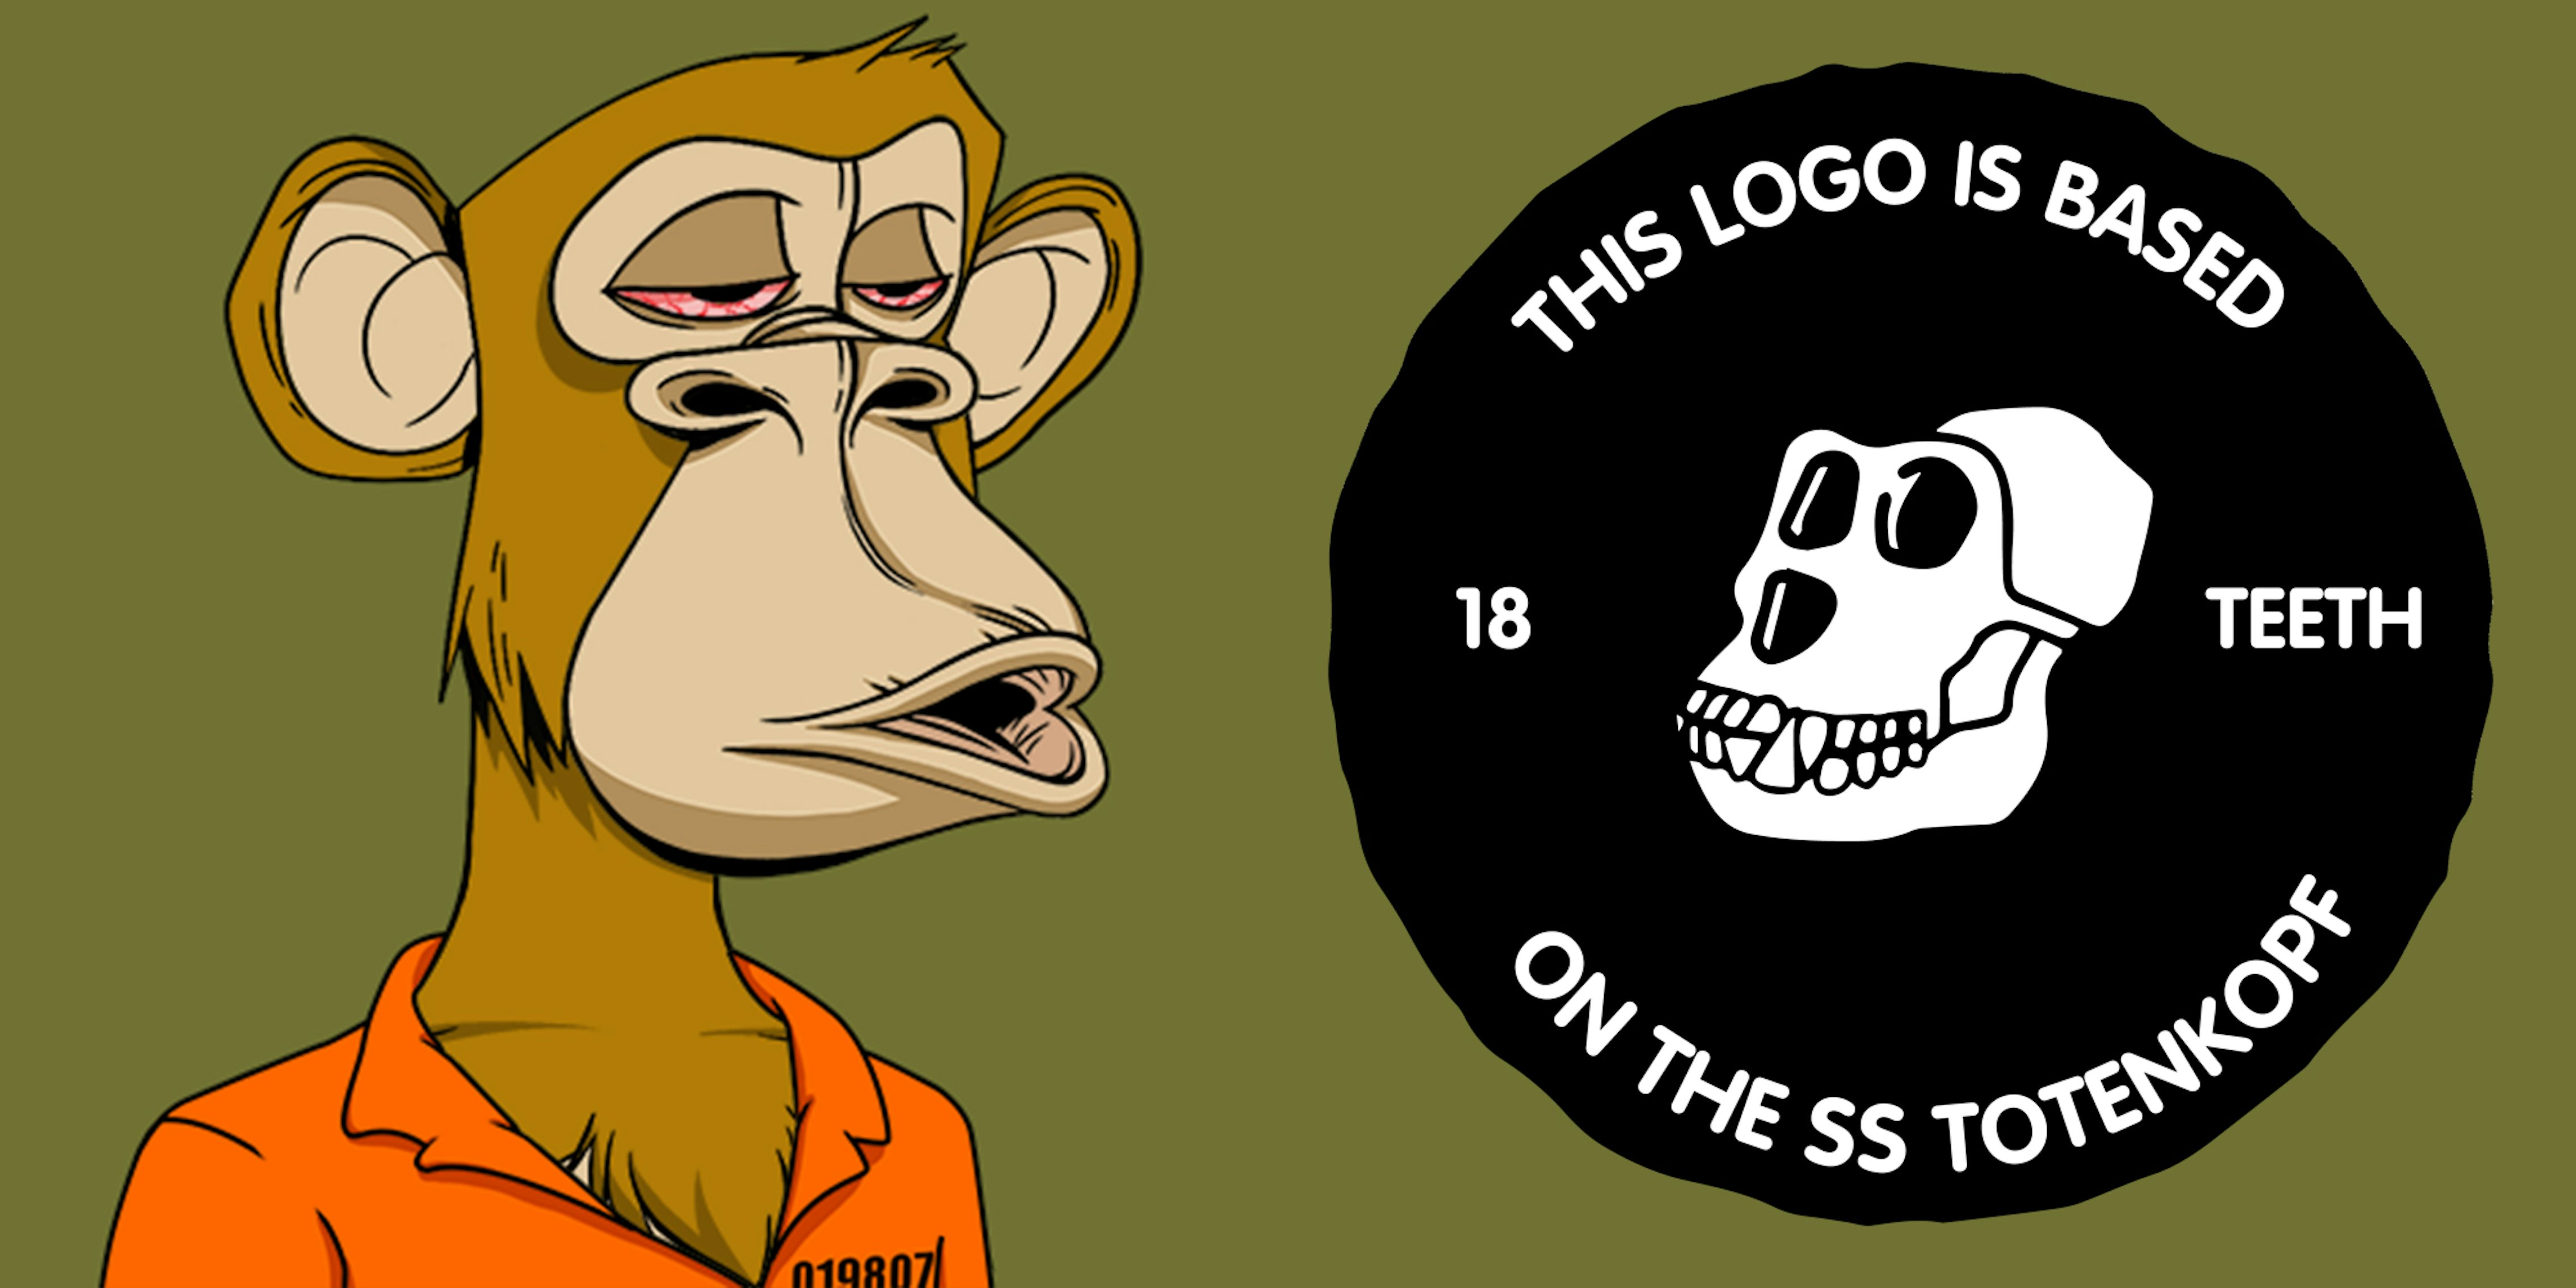 ape with bloodshot eyes in prison uniform with logo